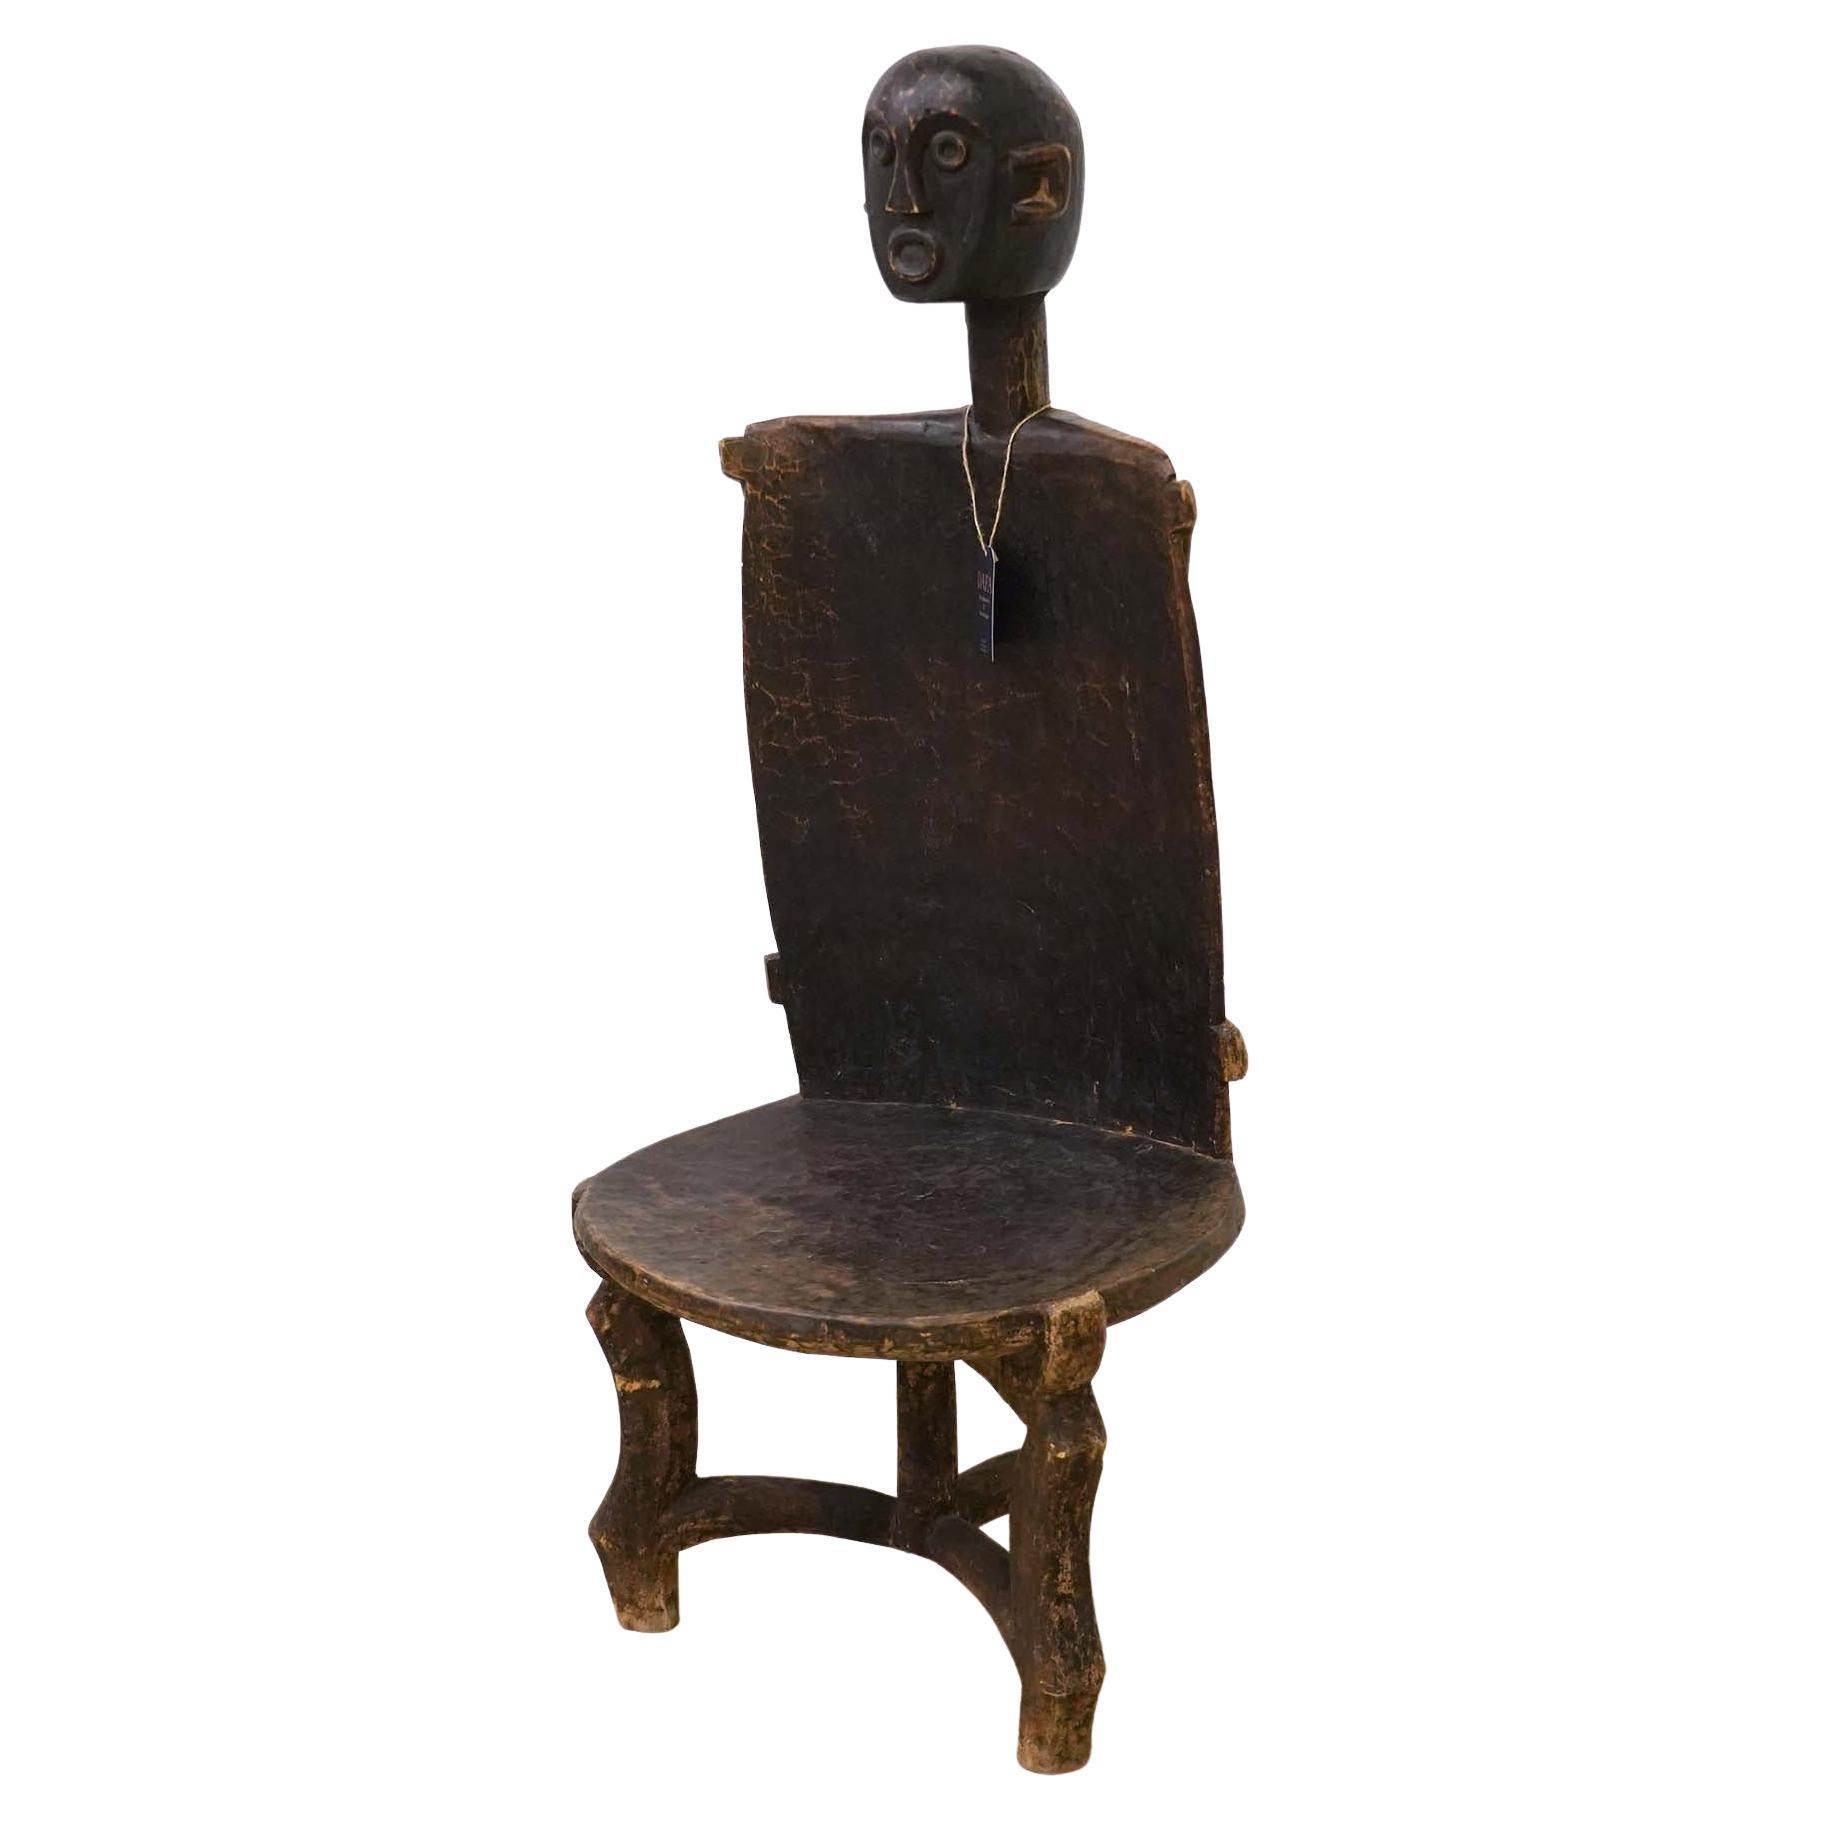 Large African Figural Throne Chair by the Nyamwezi People, Tanzania 20th C.